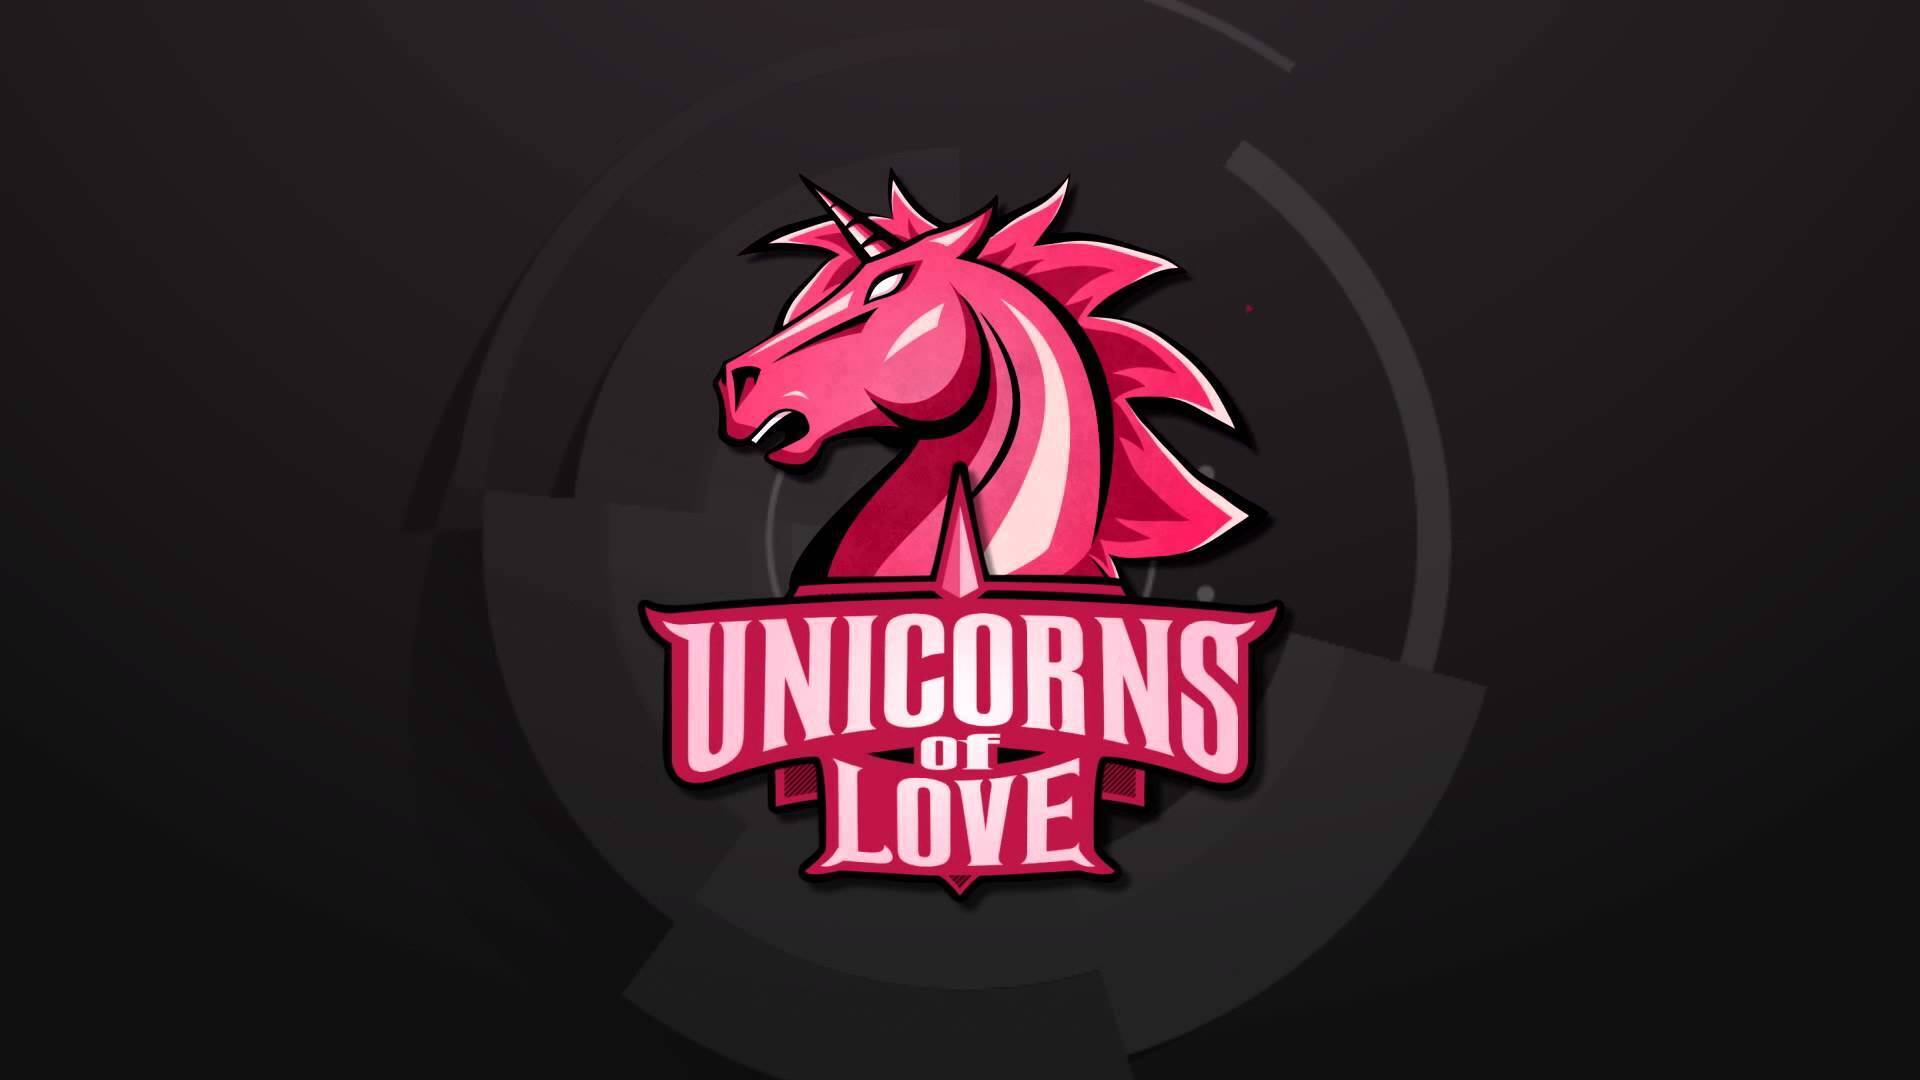 In what can only be described as one of the most amazing team announcements in esports history, Unicorns of Love revealed their new CS:GO line-up.